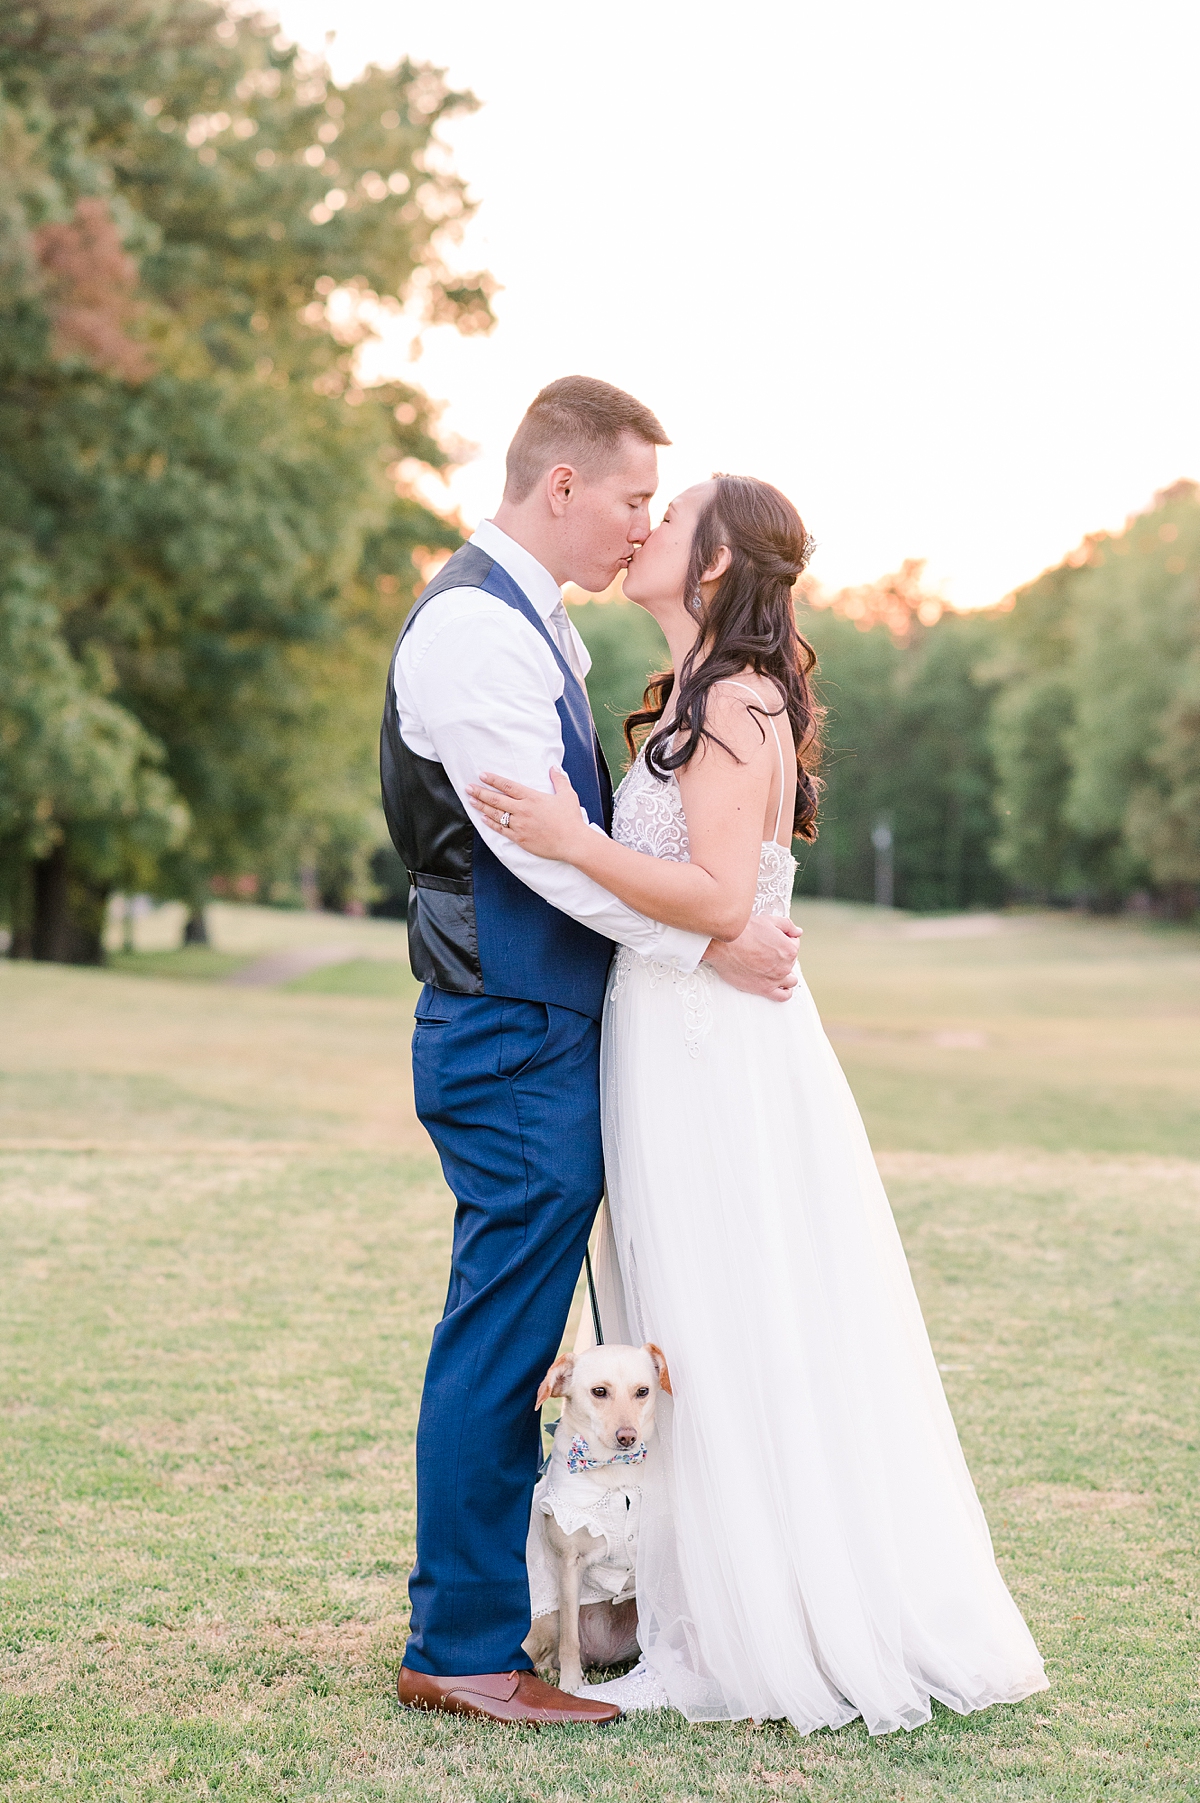 Bride and Groom sunset portraits with dog at Hanover Golf Club wedding. Photography by Richmond Wedding Photographer Kailey Brianne Photography. 